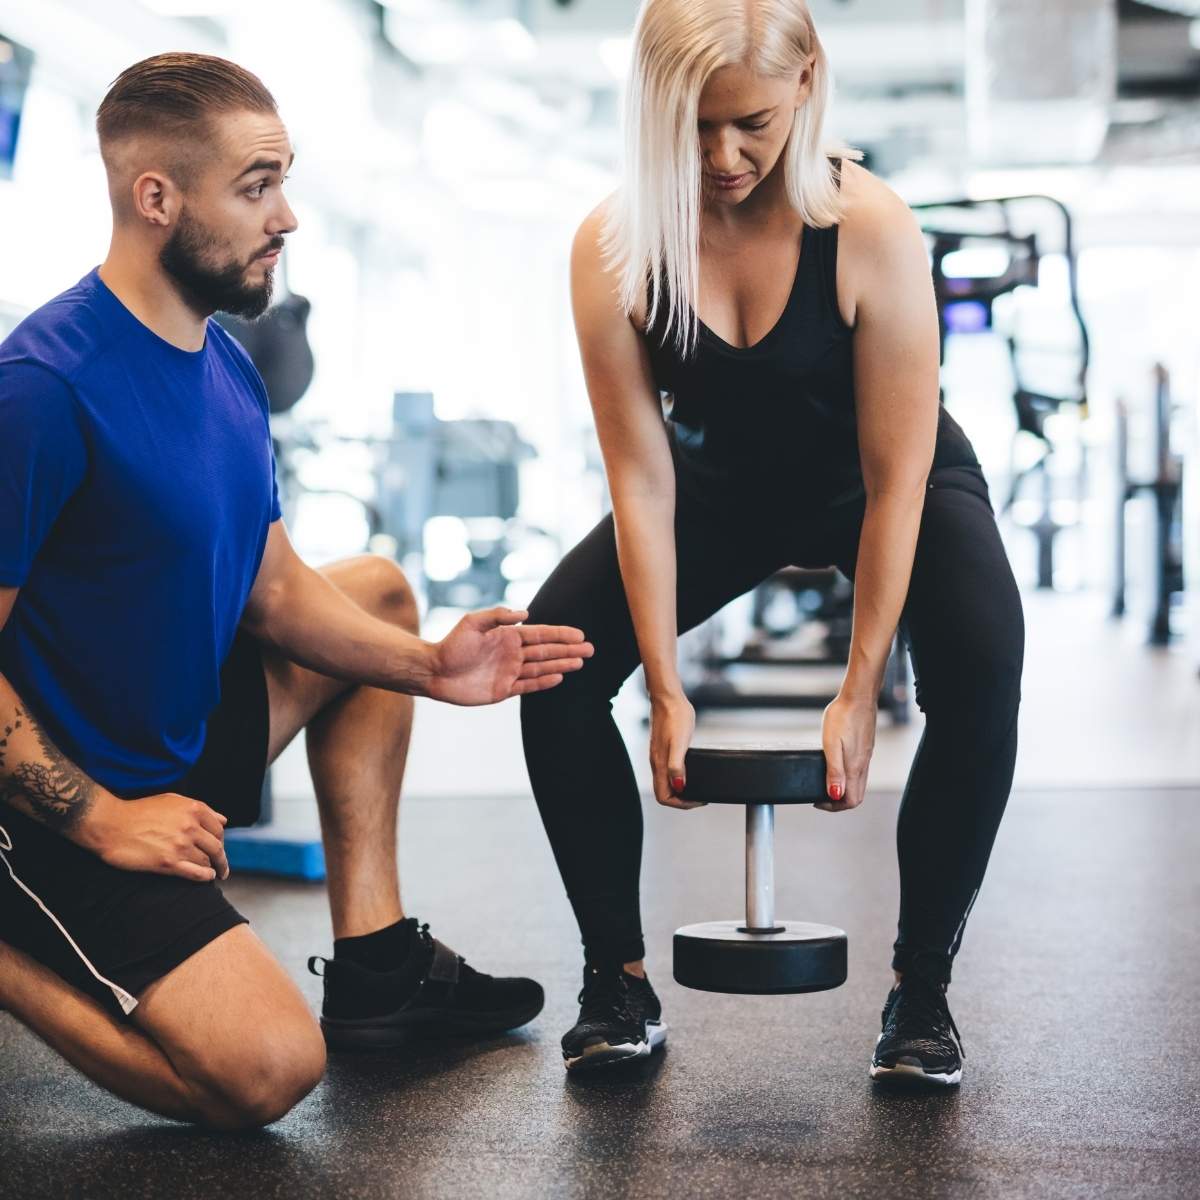 7 tips to find a personal trainer